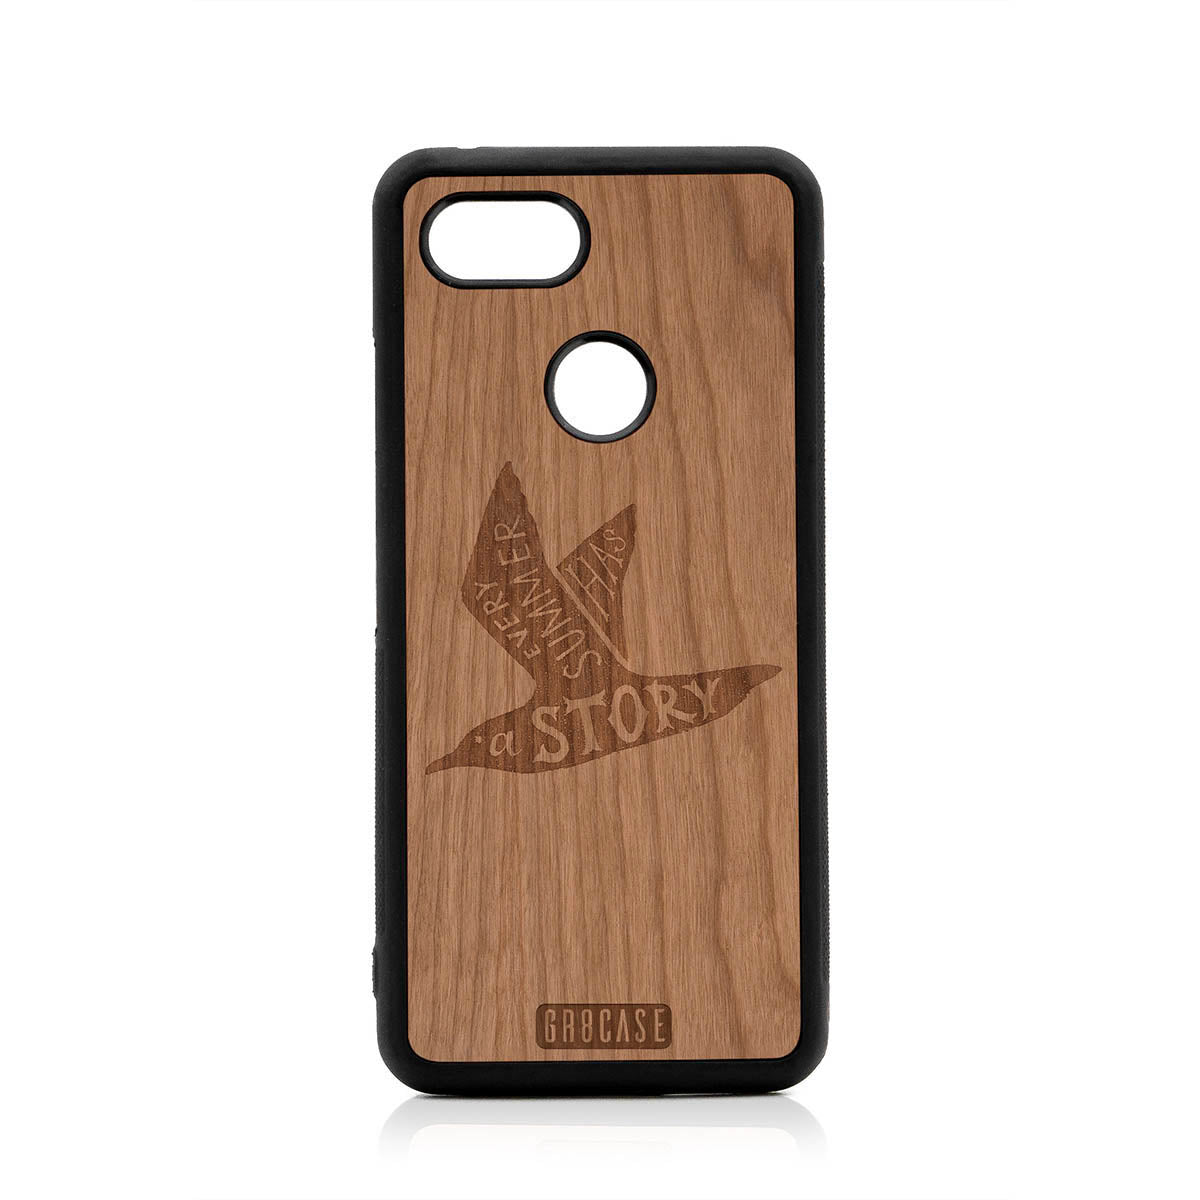 Every Summer Has A Story (Seagull) Design Wood Case For Google Pixel 3